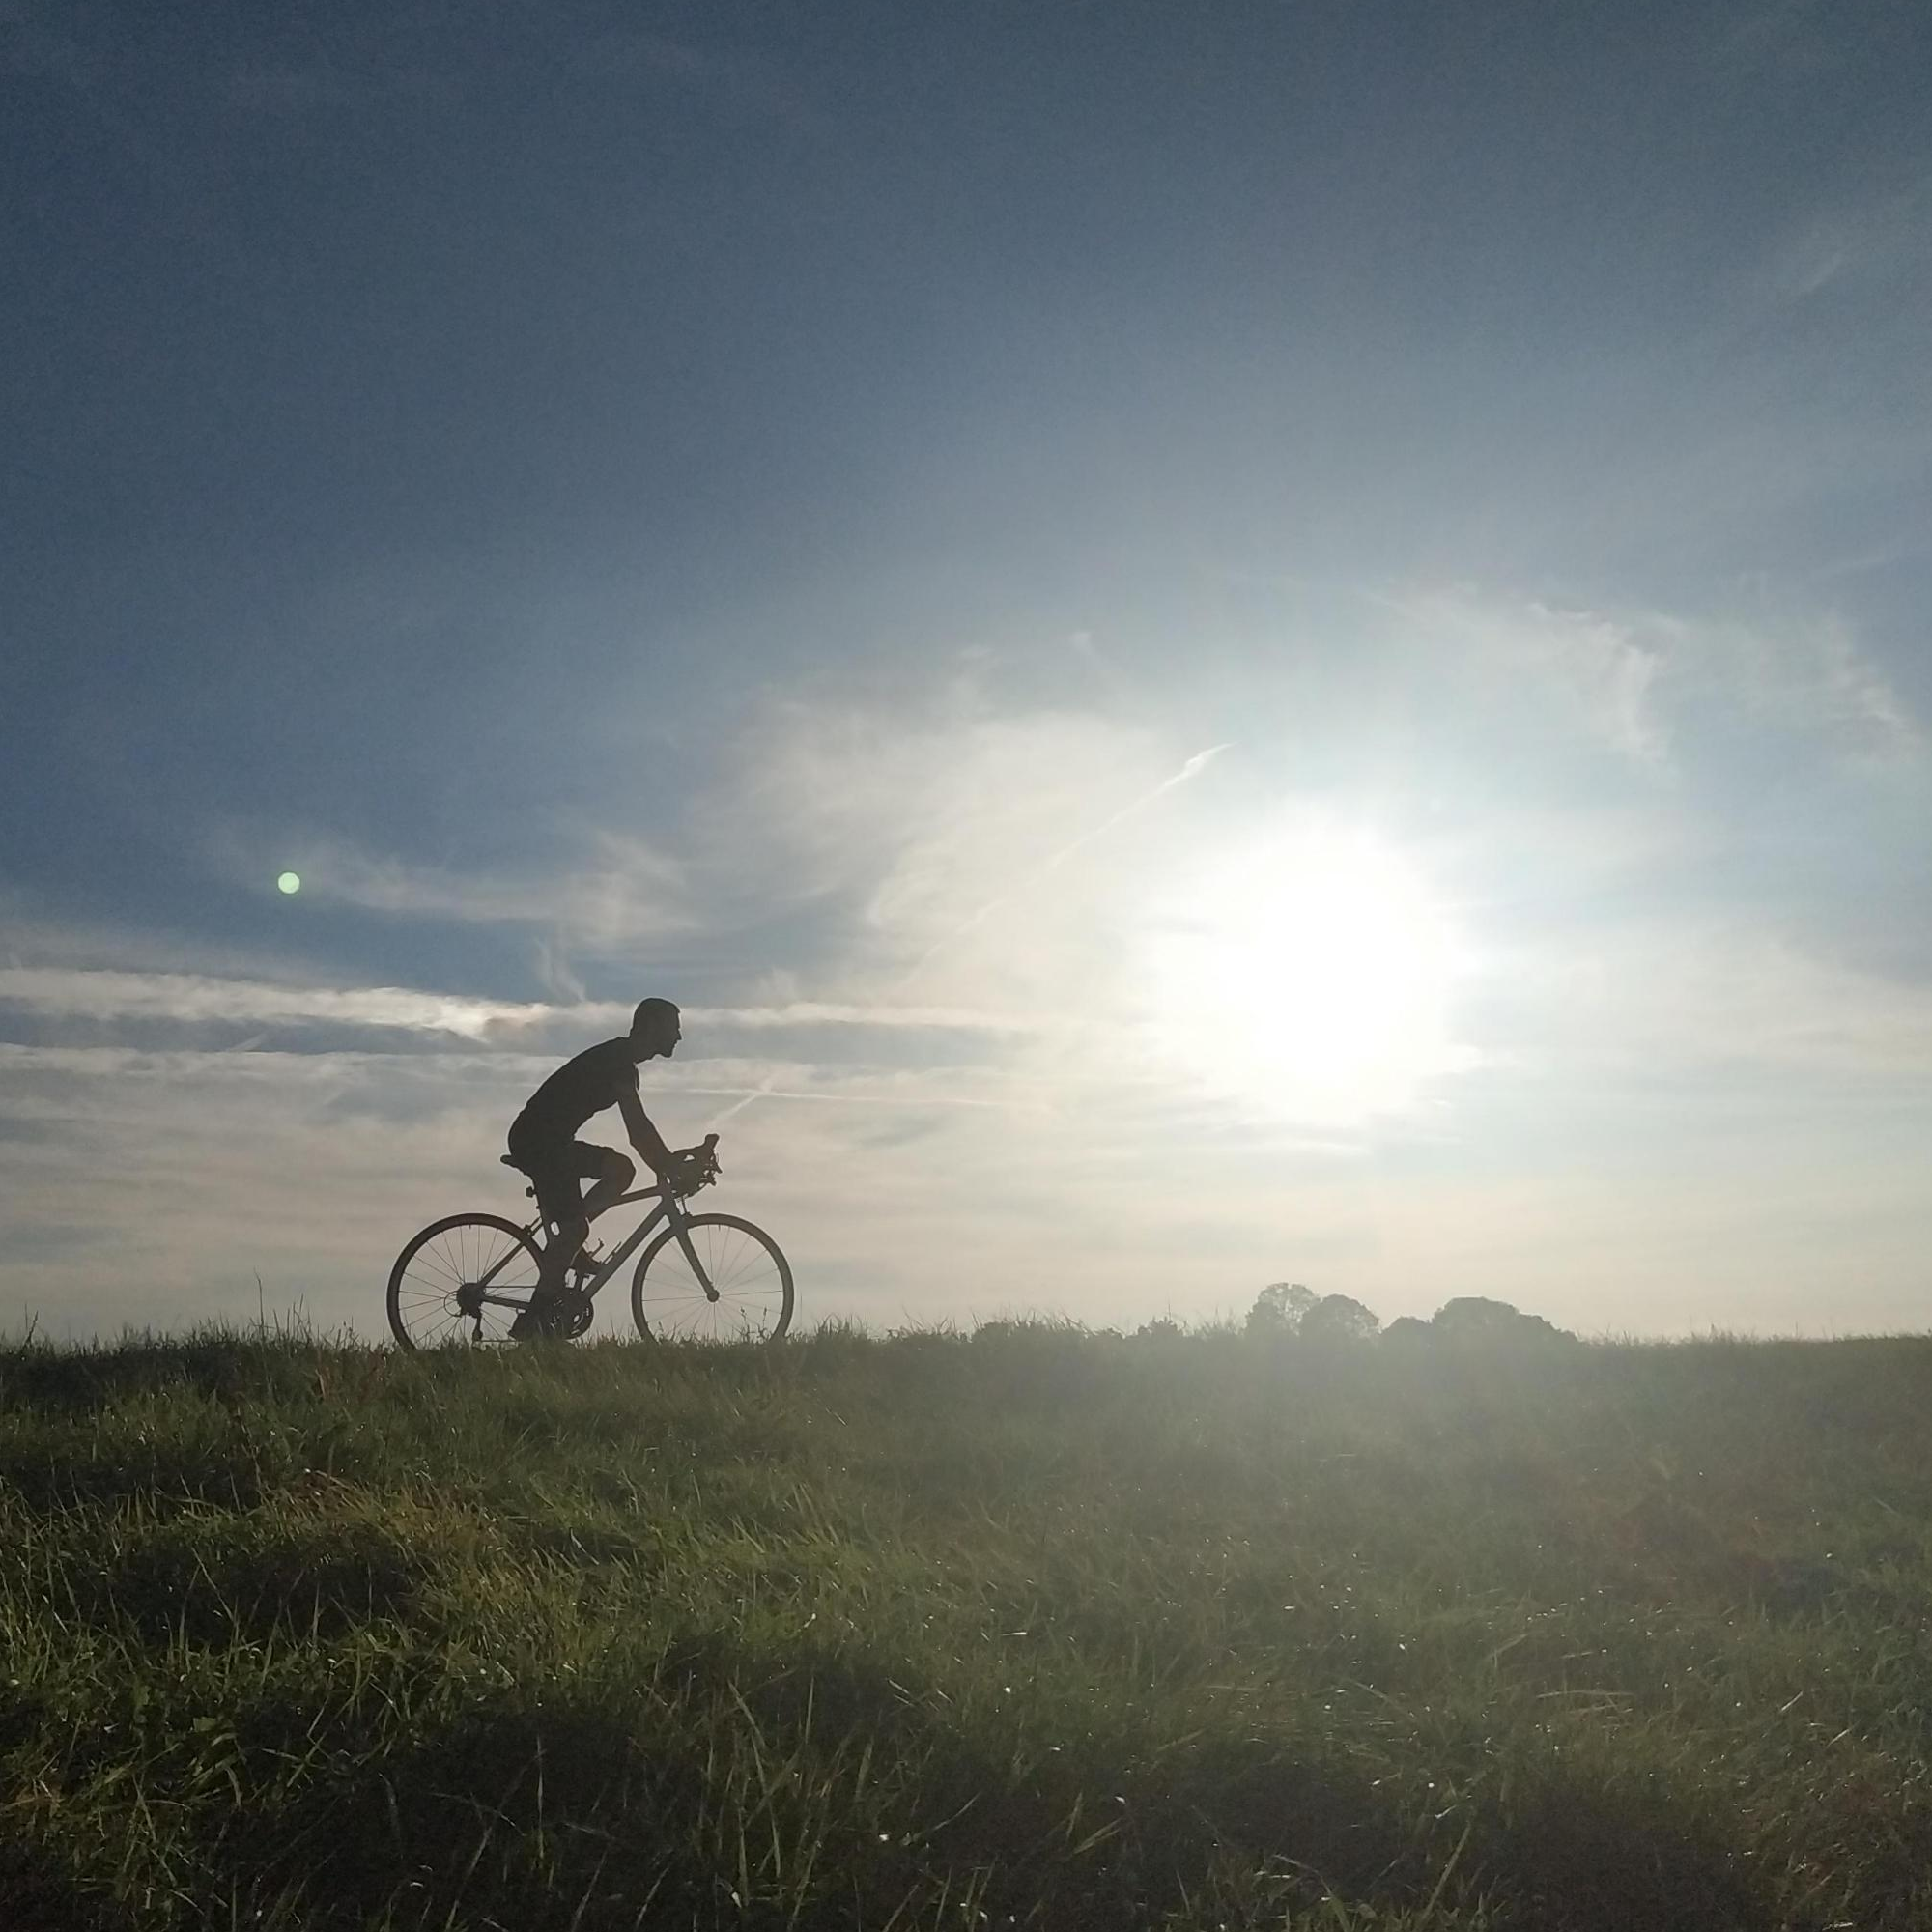 Me as a silhouette cycling my typically Dutch bike atop a typically Dutch dike, while the sun sets in the background